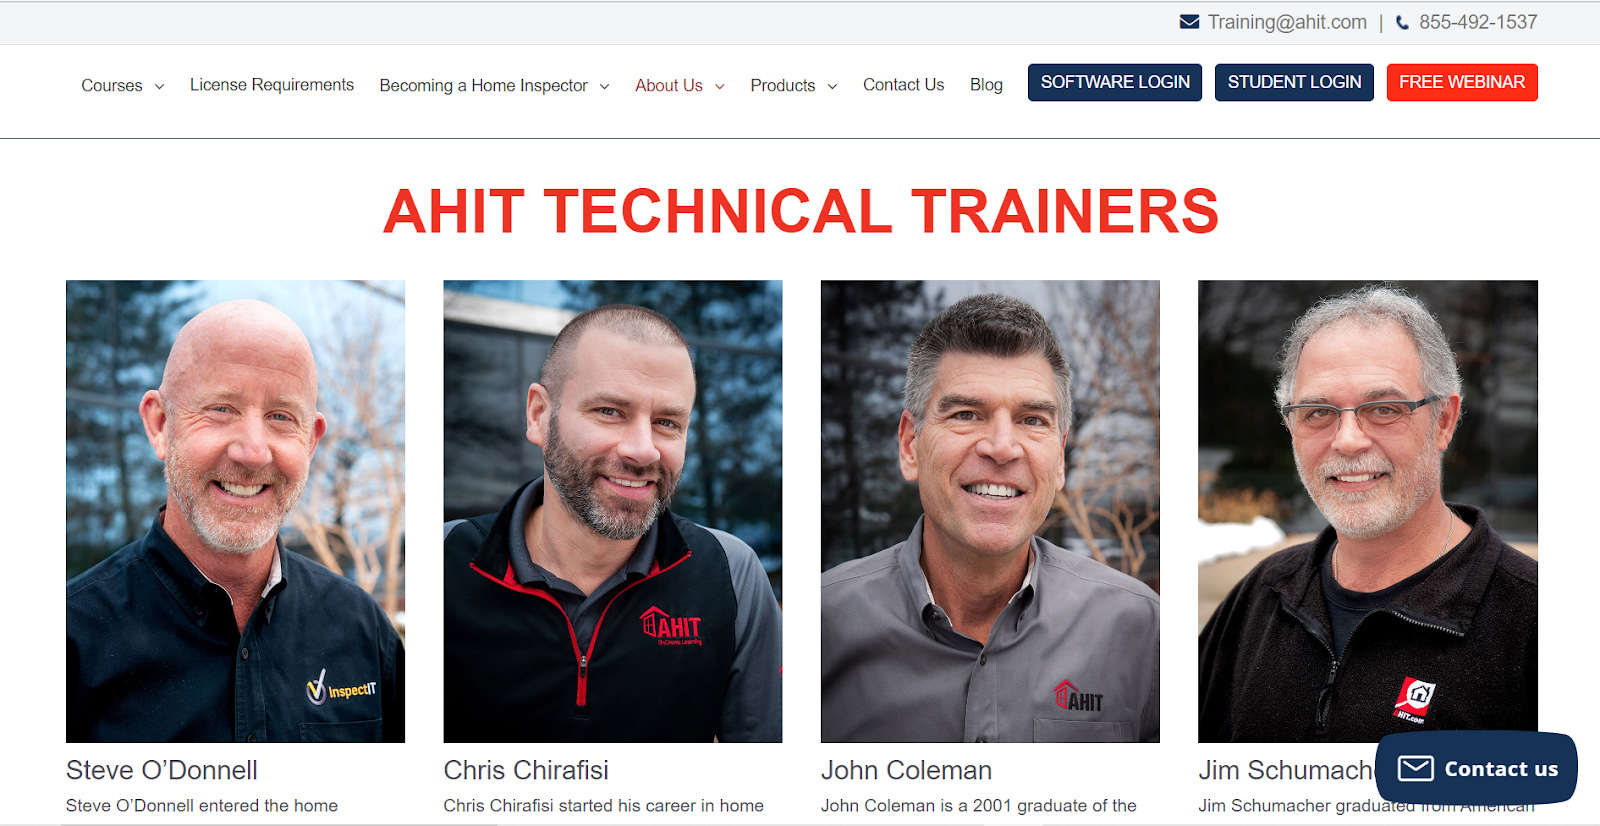 List of AHIT technical trainers.